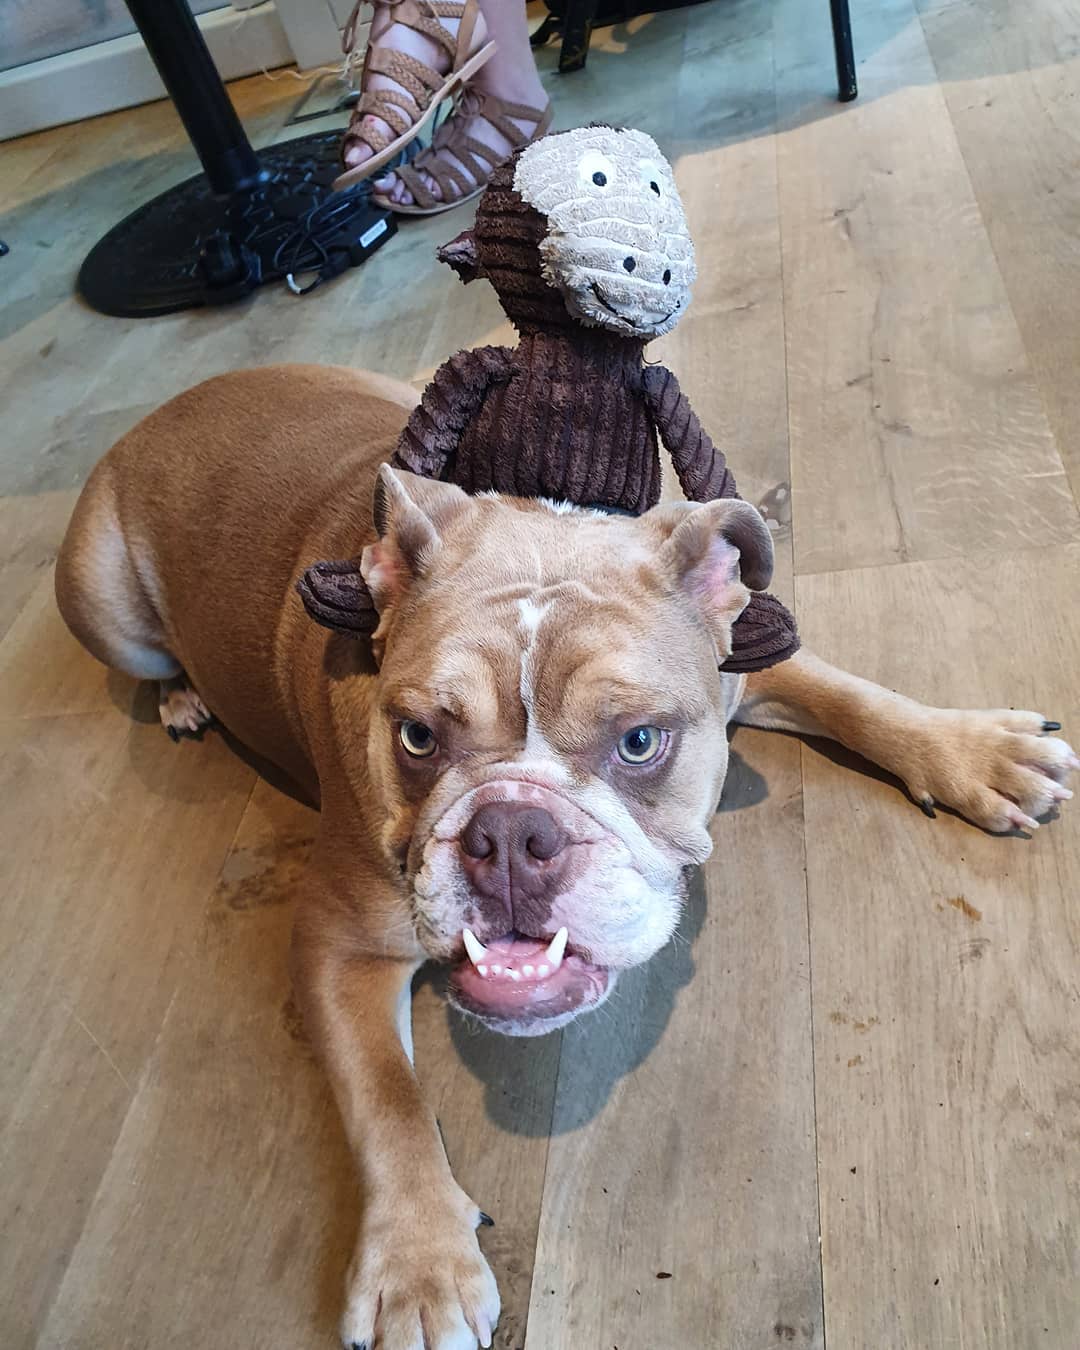 English Bulldog lying on the floor with its angry face and monkey stuffed toy riding on its back